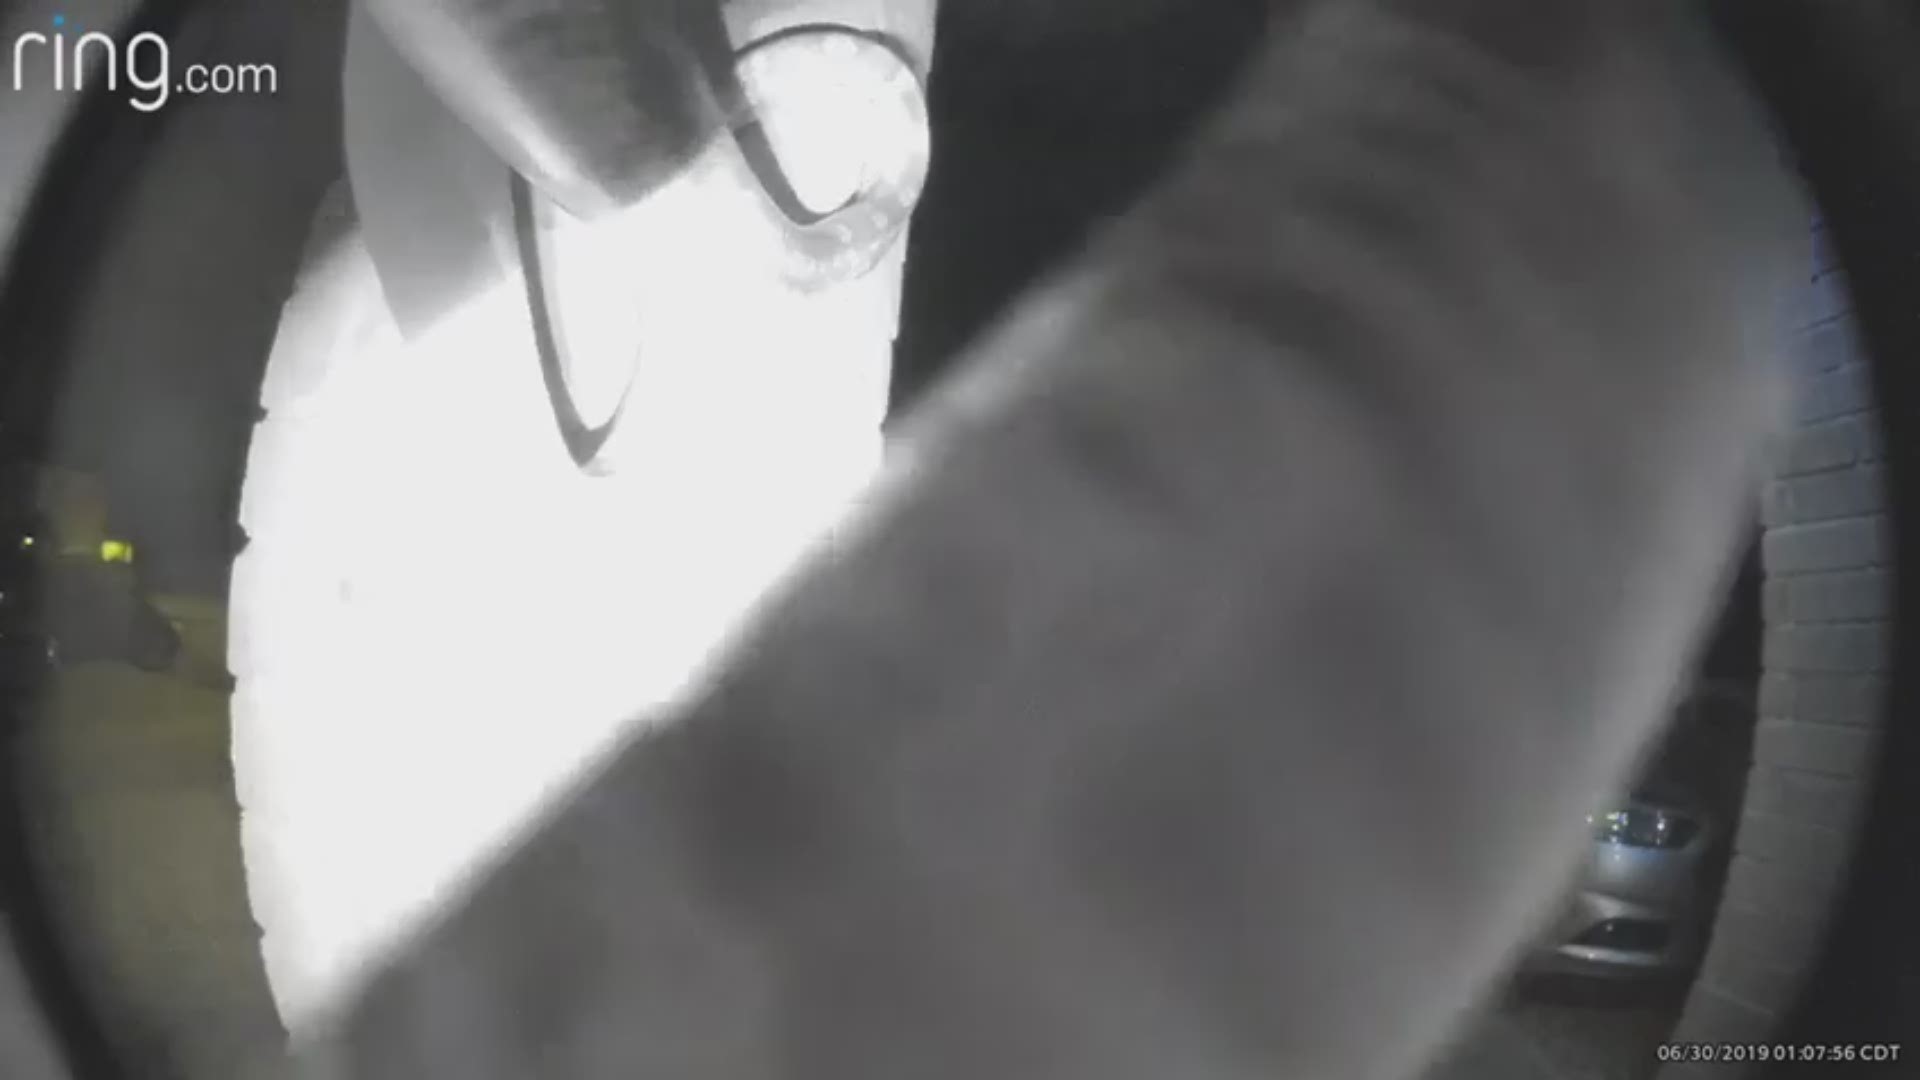 Video shows snake ringing doorbell at Texas home 